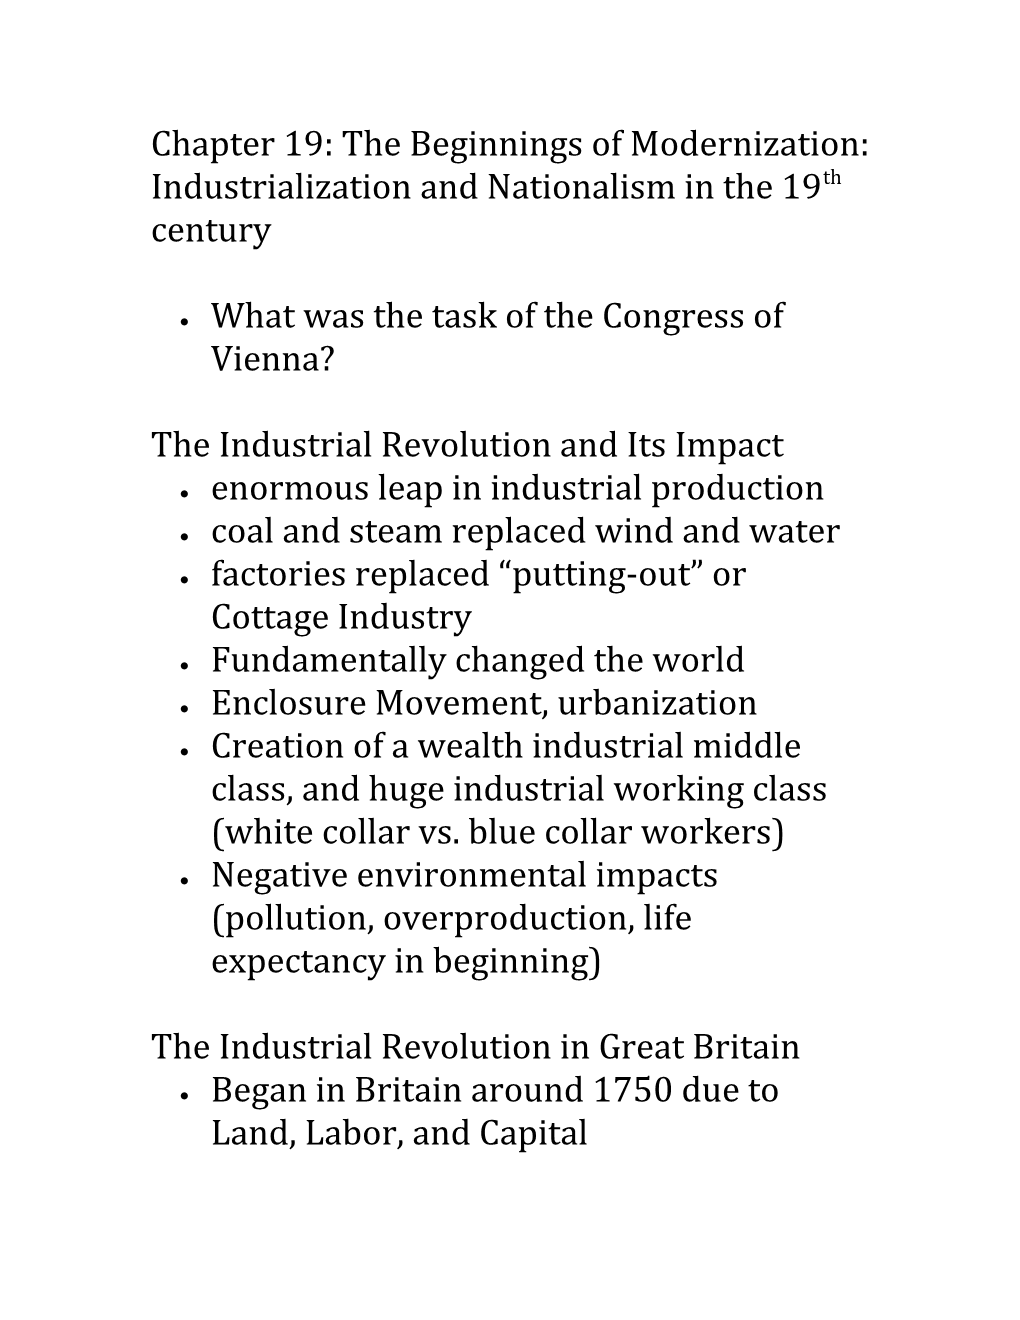 Chapter 19: the Beginnings of Modernization: Industrialization and Nationalism in the 19Th